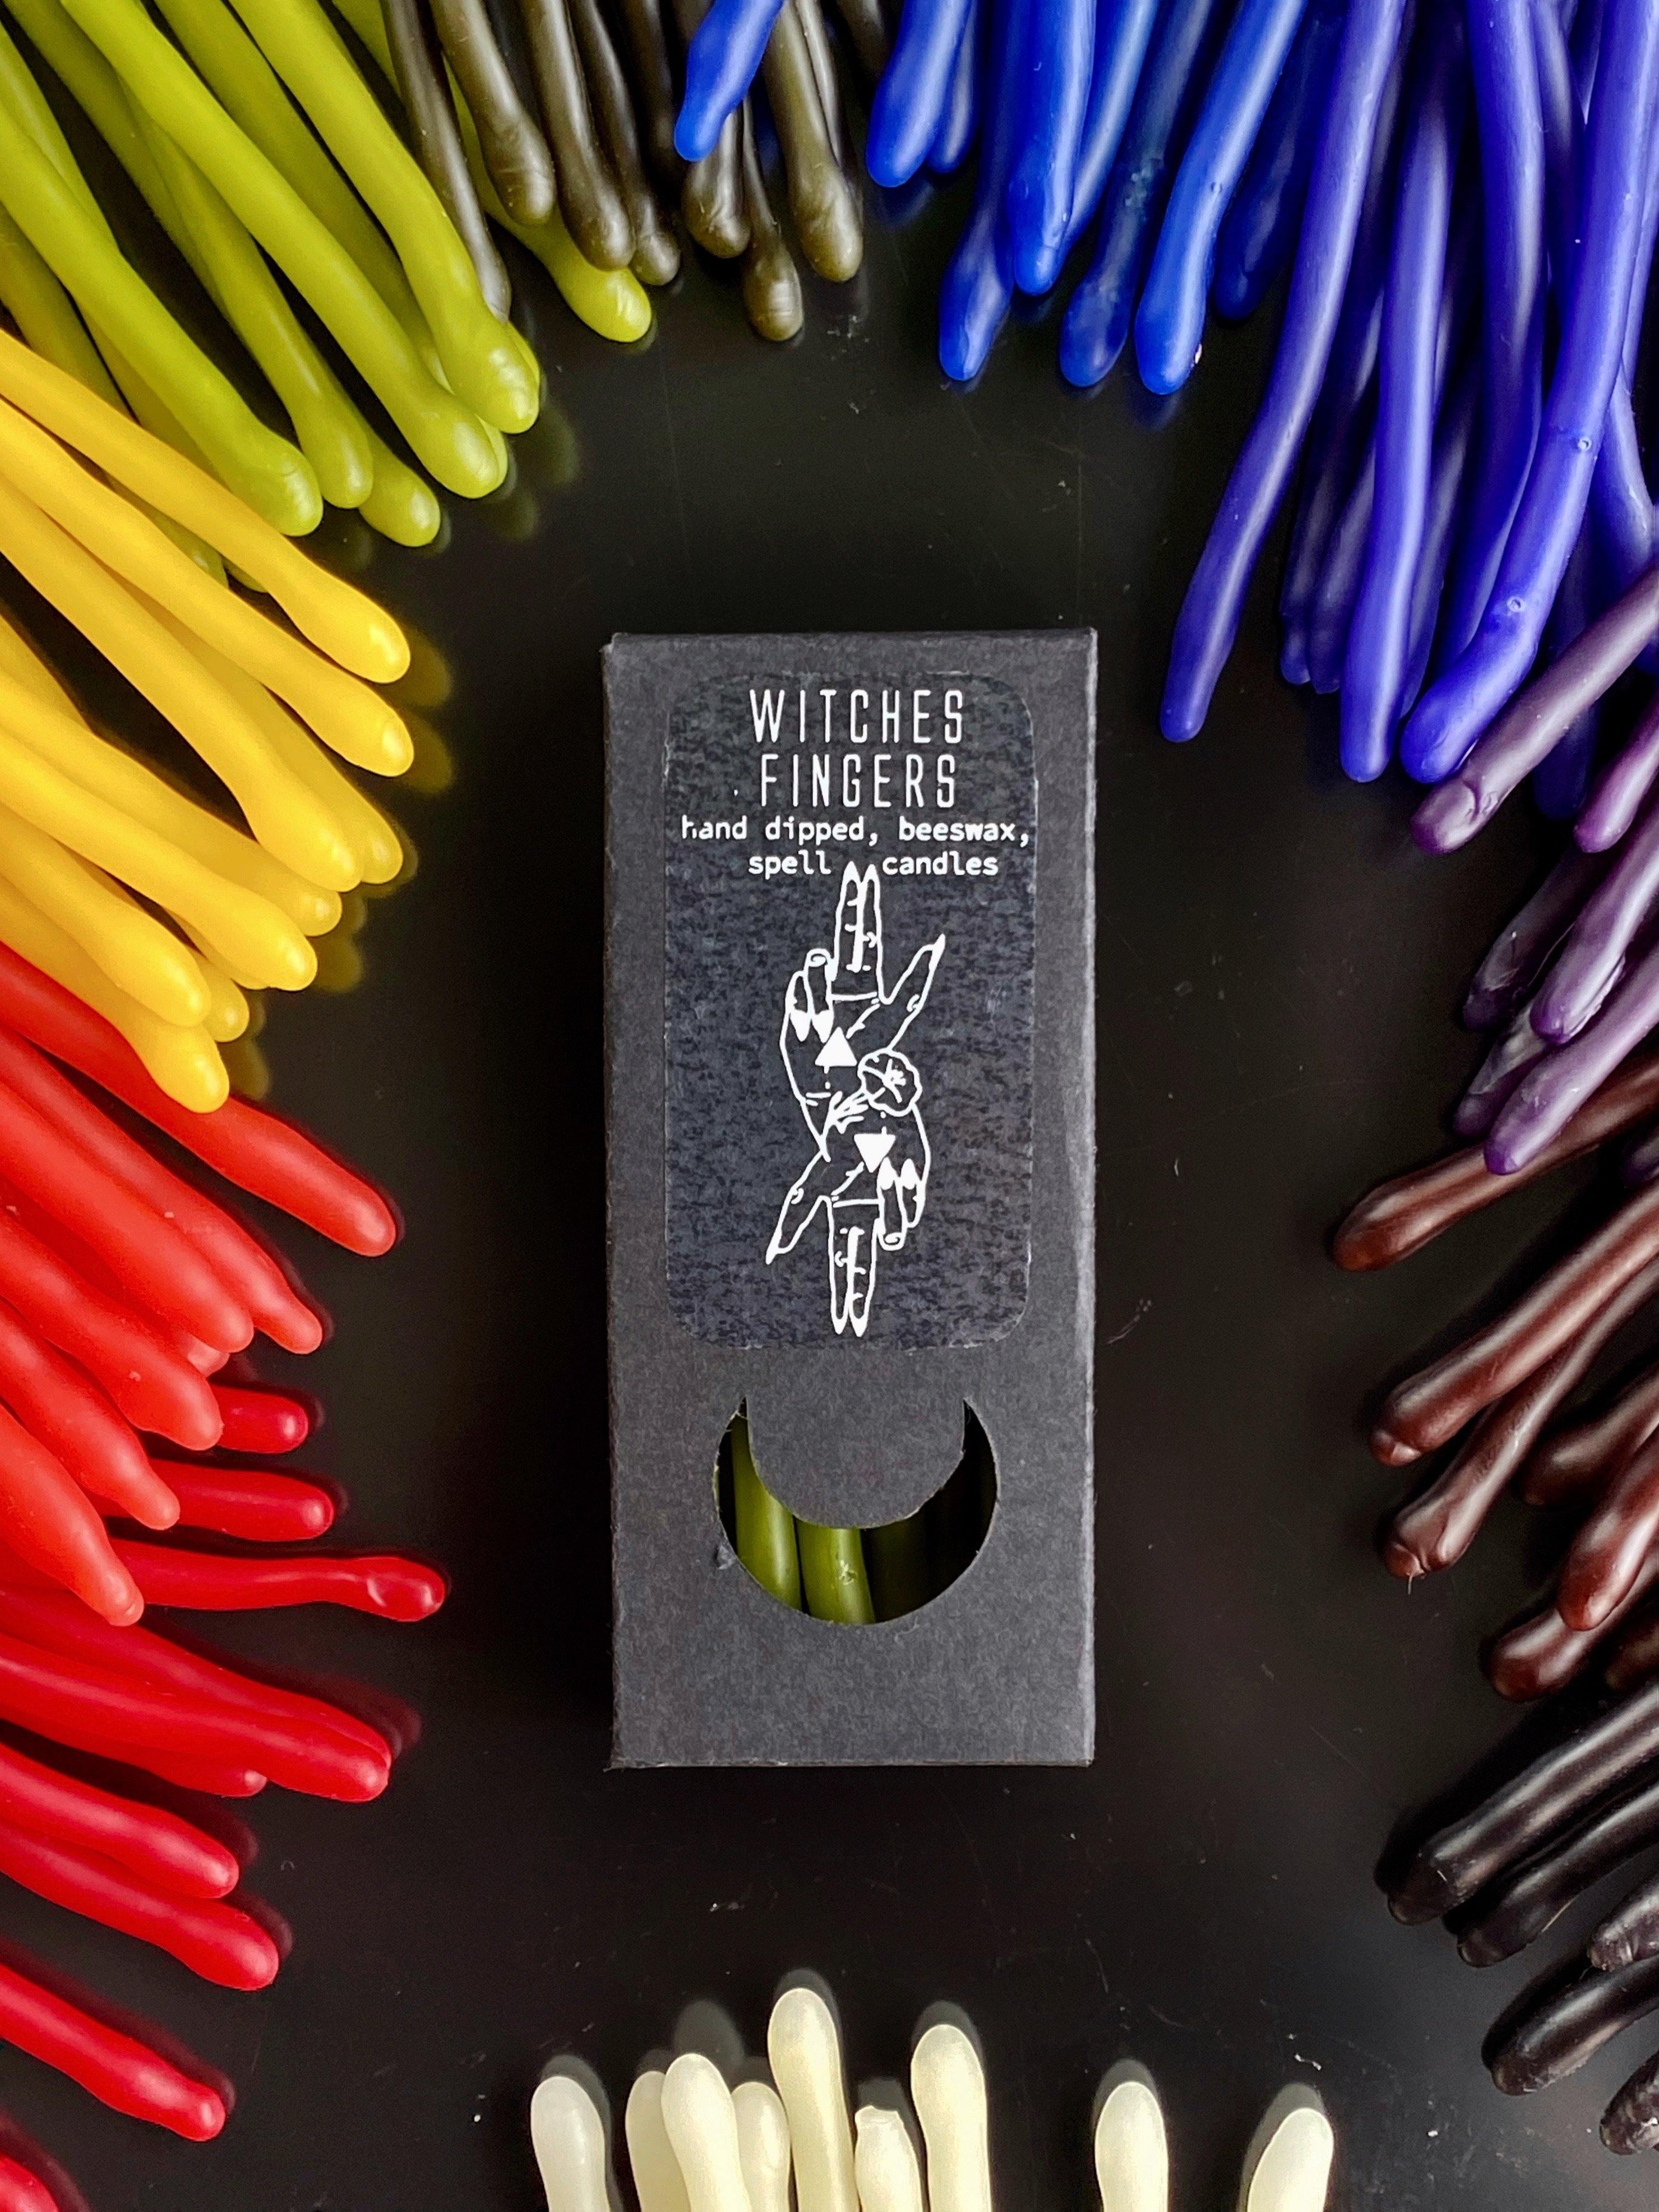 Witches Fingers - Hand Dipped, Mini, Beeswax Spell (Chime) Candles - Keven Craft Rituals